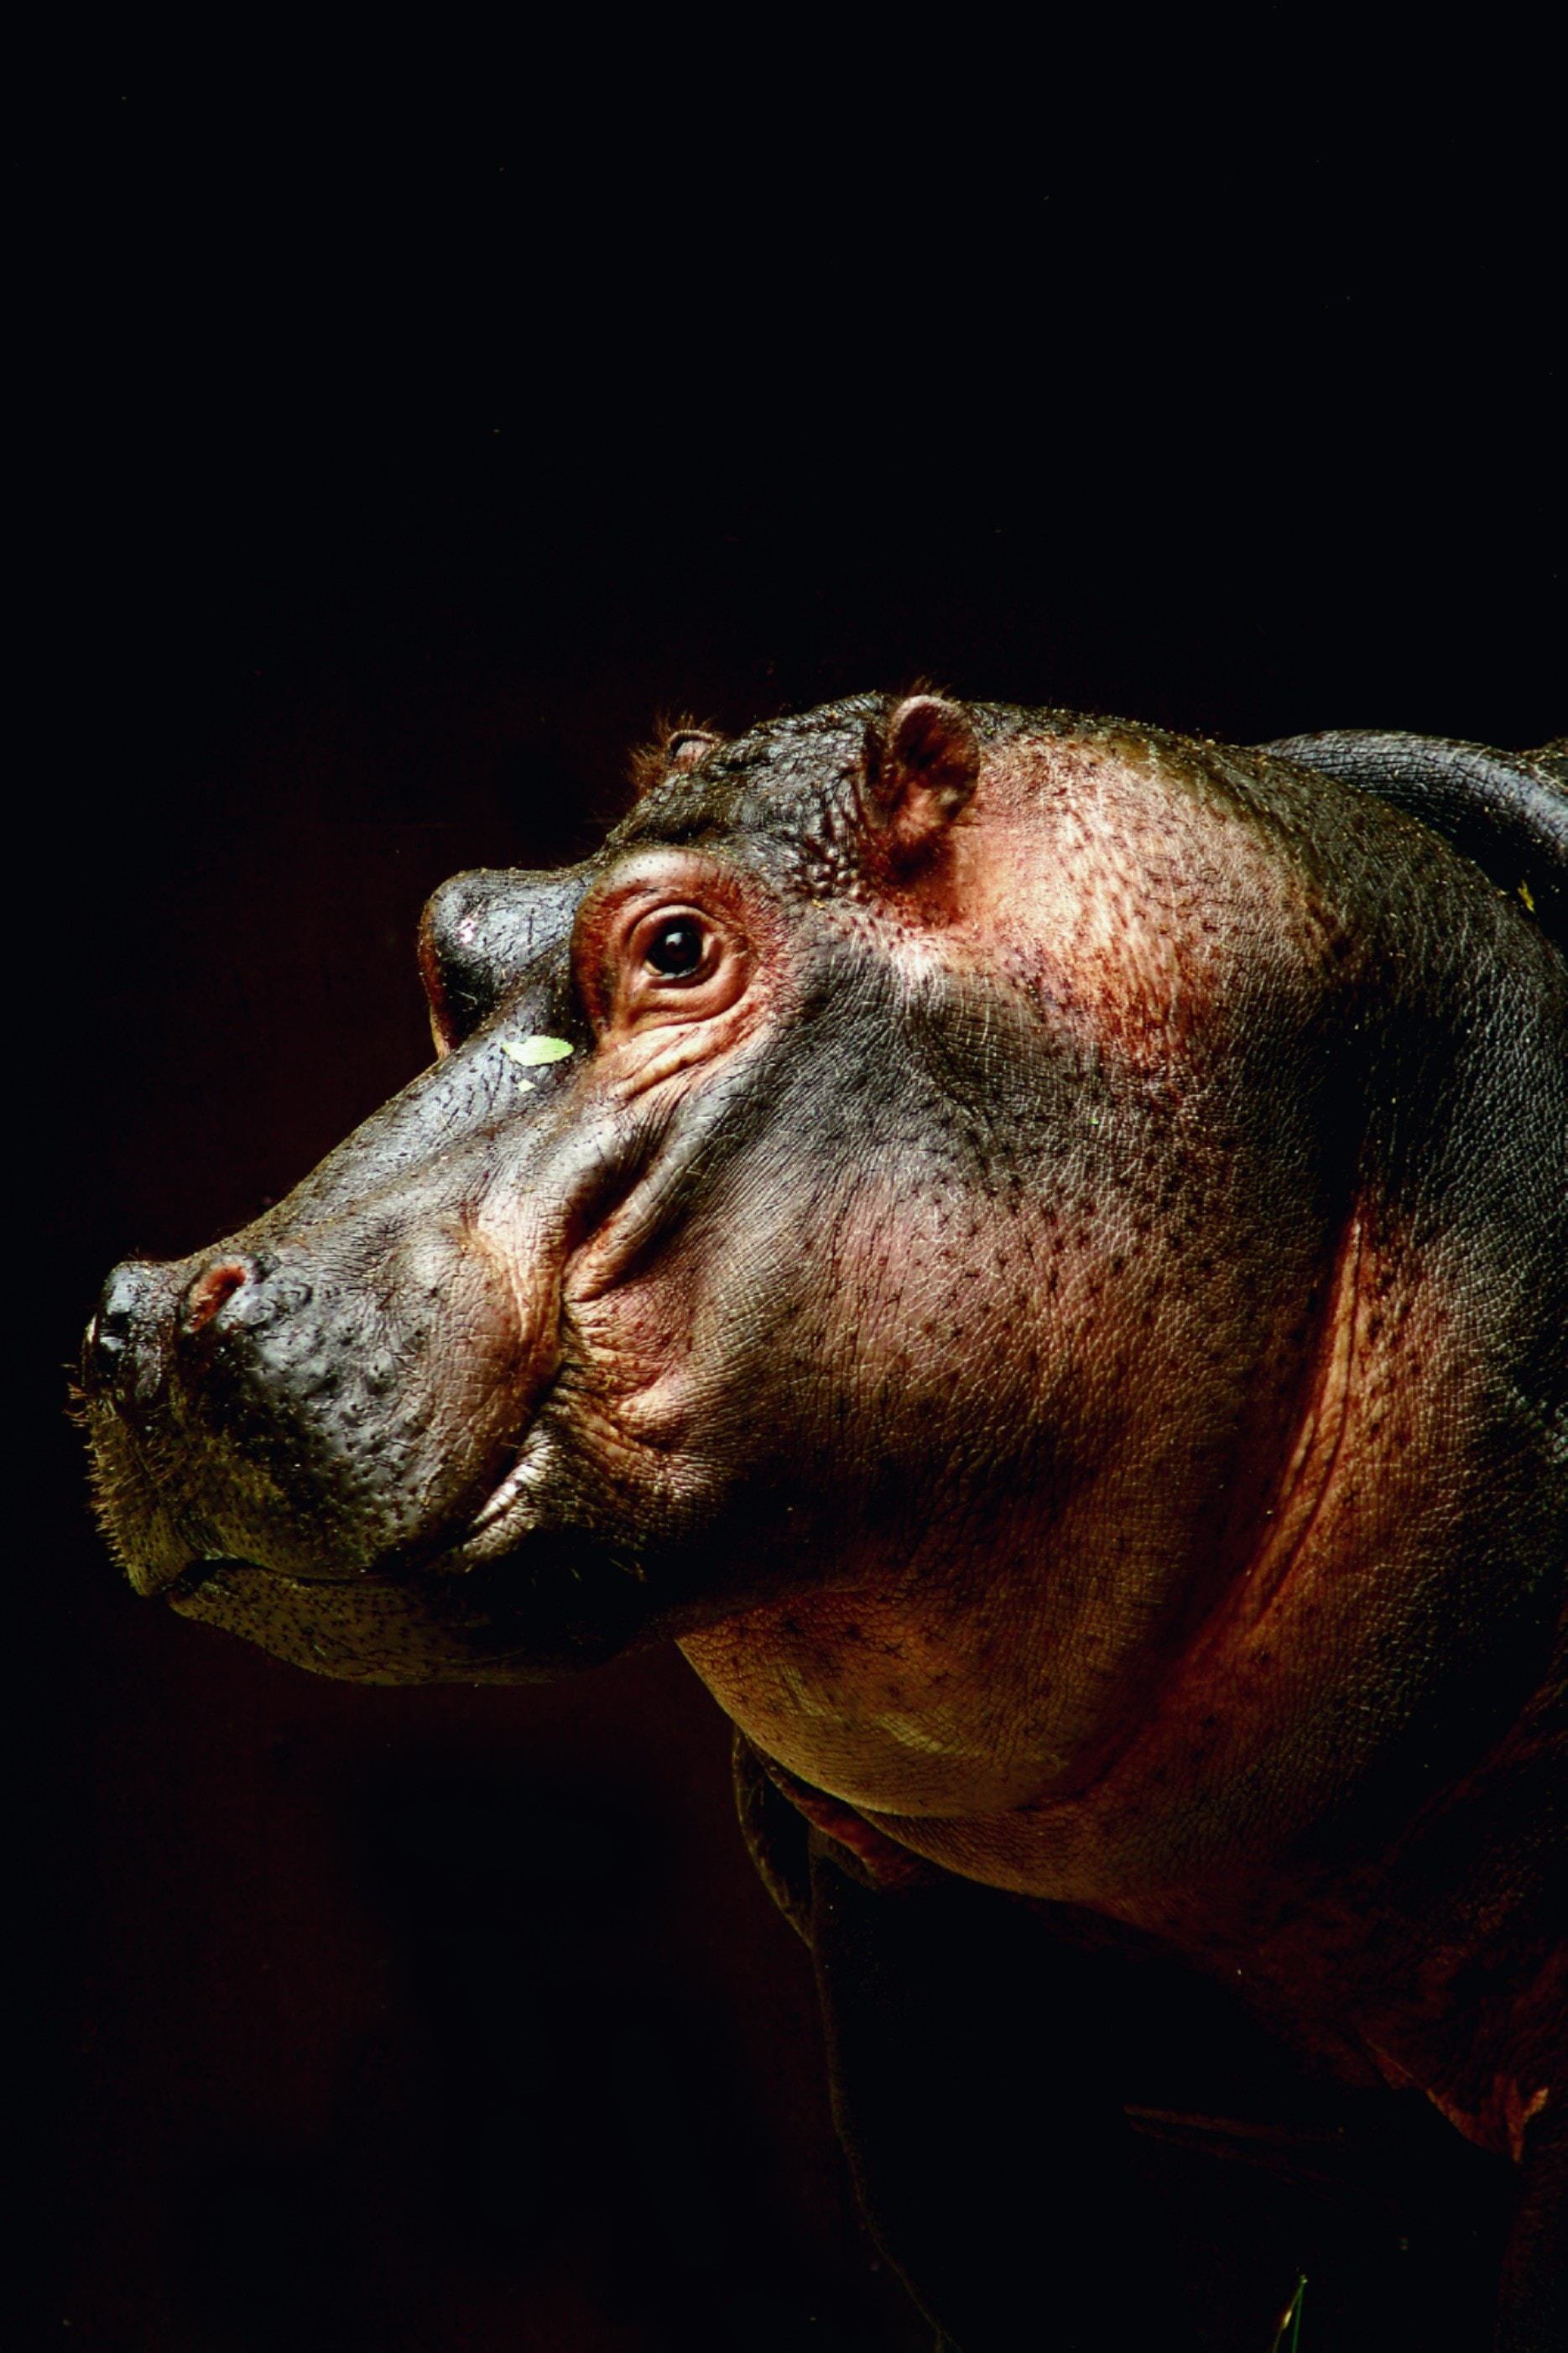 A photo portrait of a hippopotamus with studio lighting and a black background